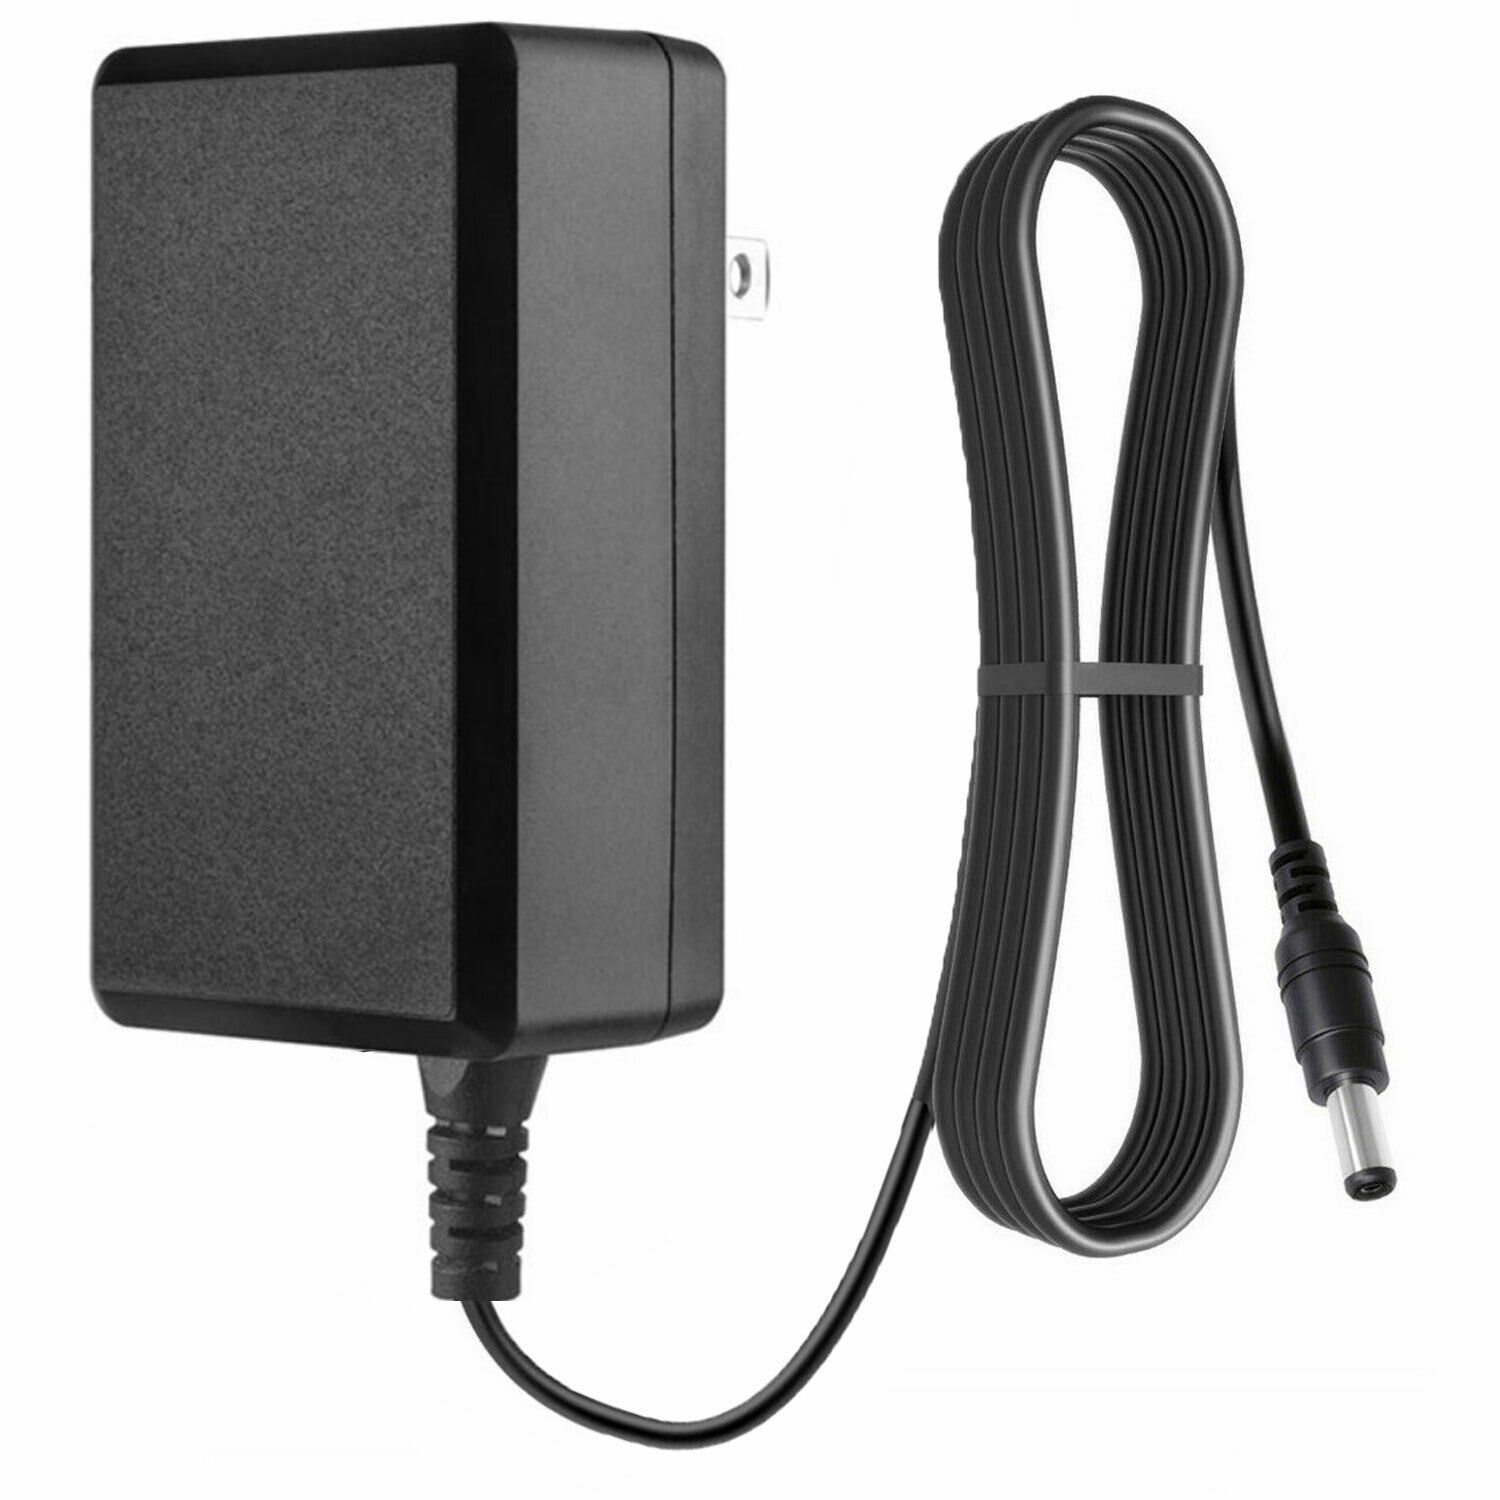 *Brand NEW*Ac Adapter Works With Symbol Motorola P/N Pl370-1000Us Cradle Power Supply Cord Charger